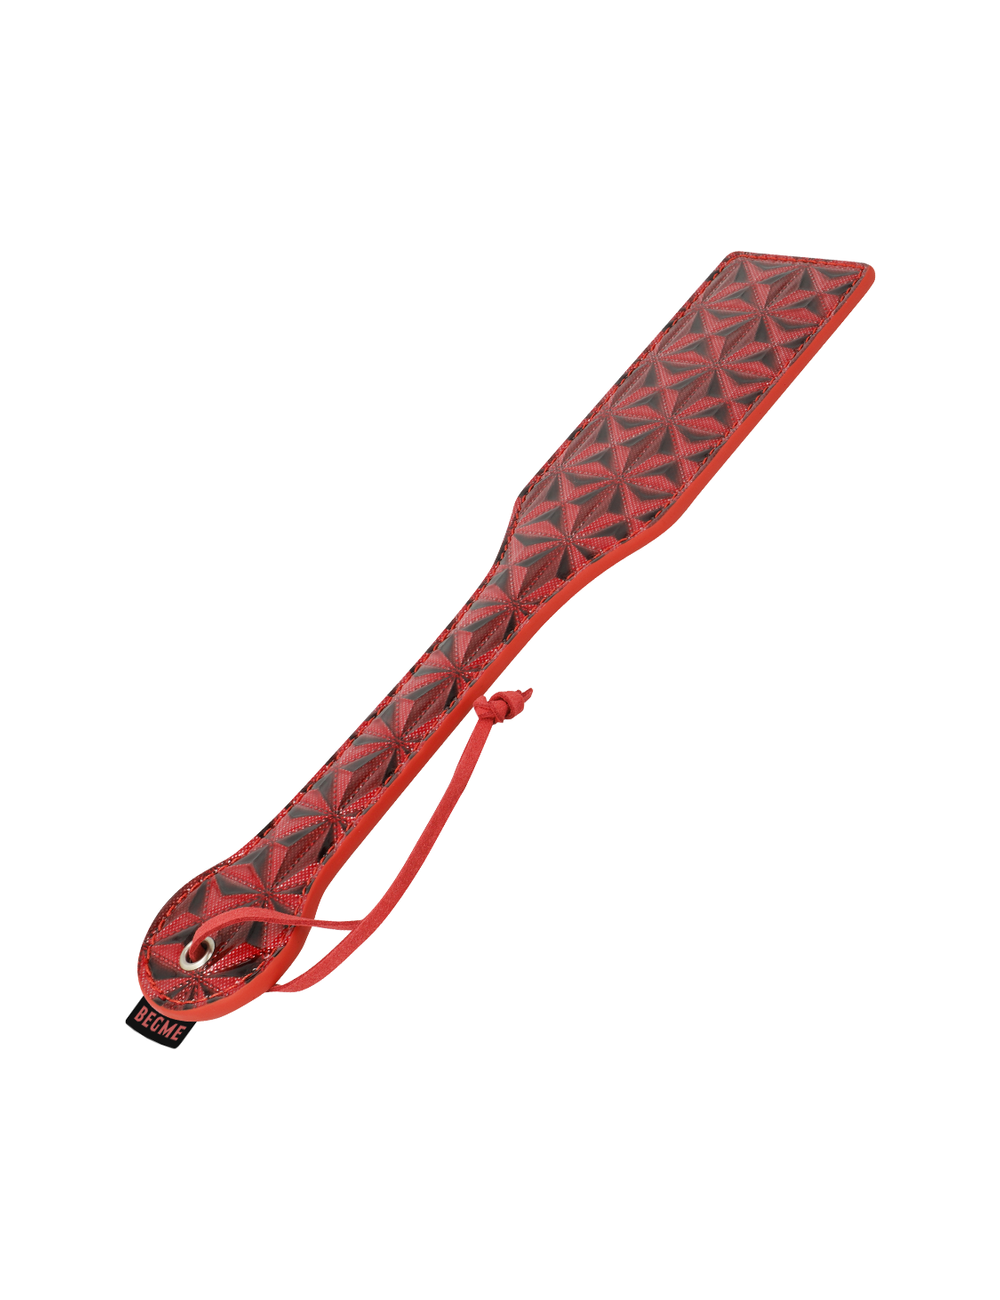 Sextoys - Fouets & Cravaches - PELLE EN CUIR VEGAN BEGME RED EDITION - BEGME RED EDITION